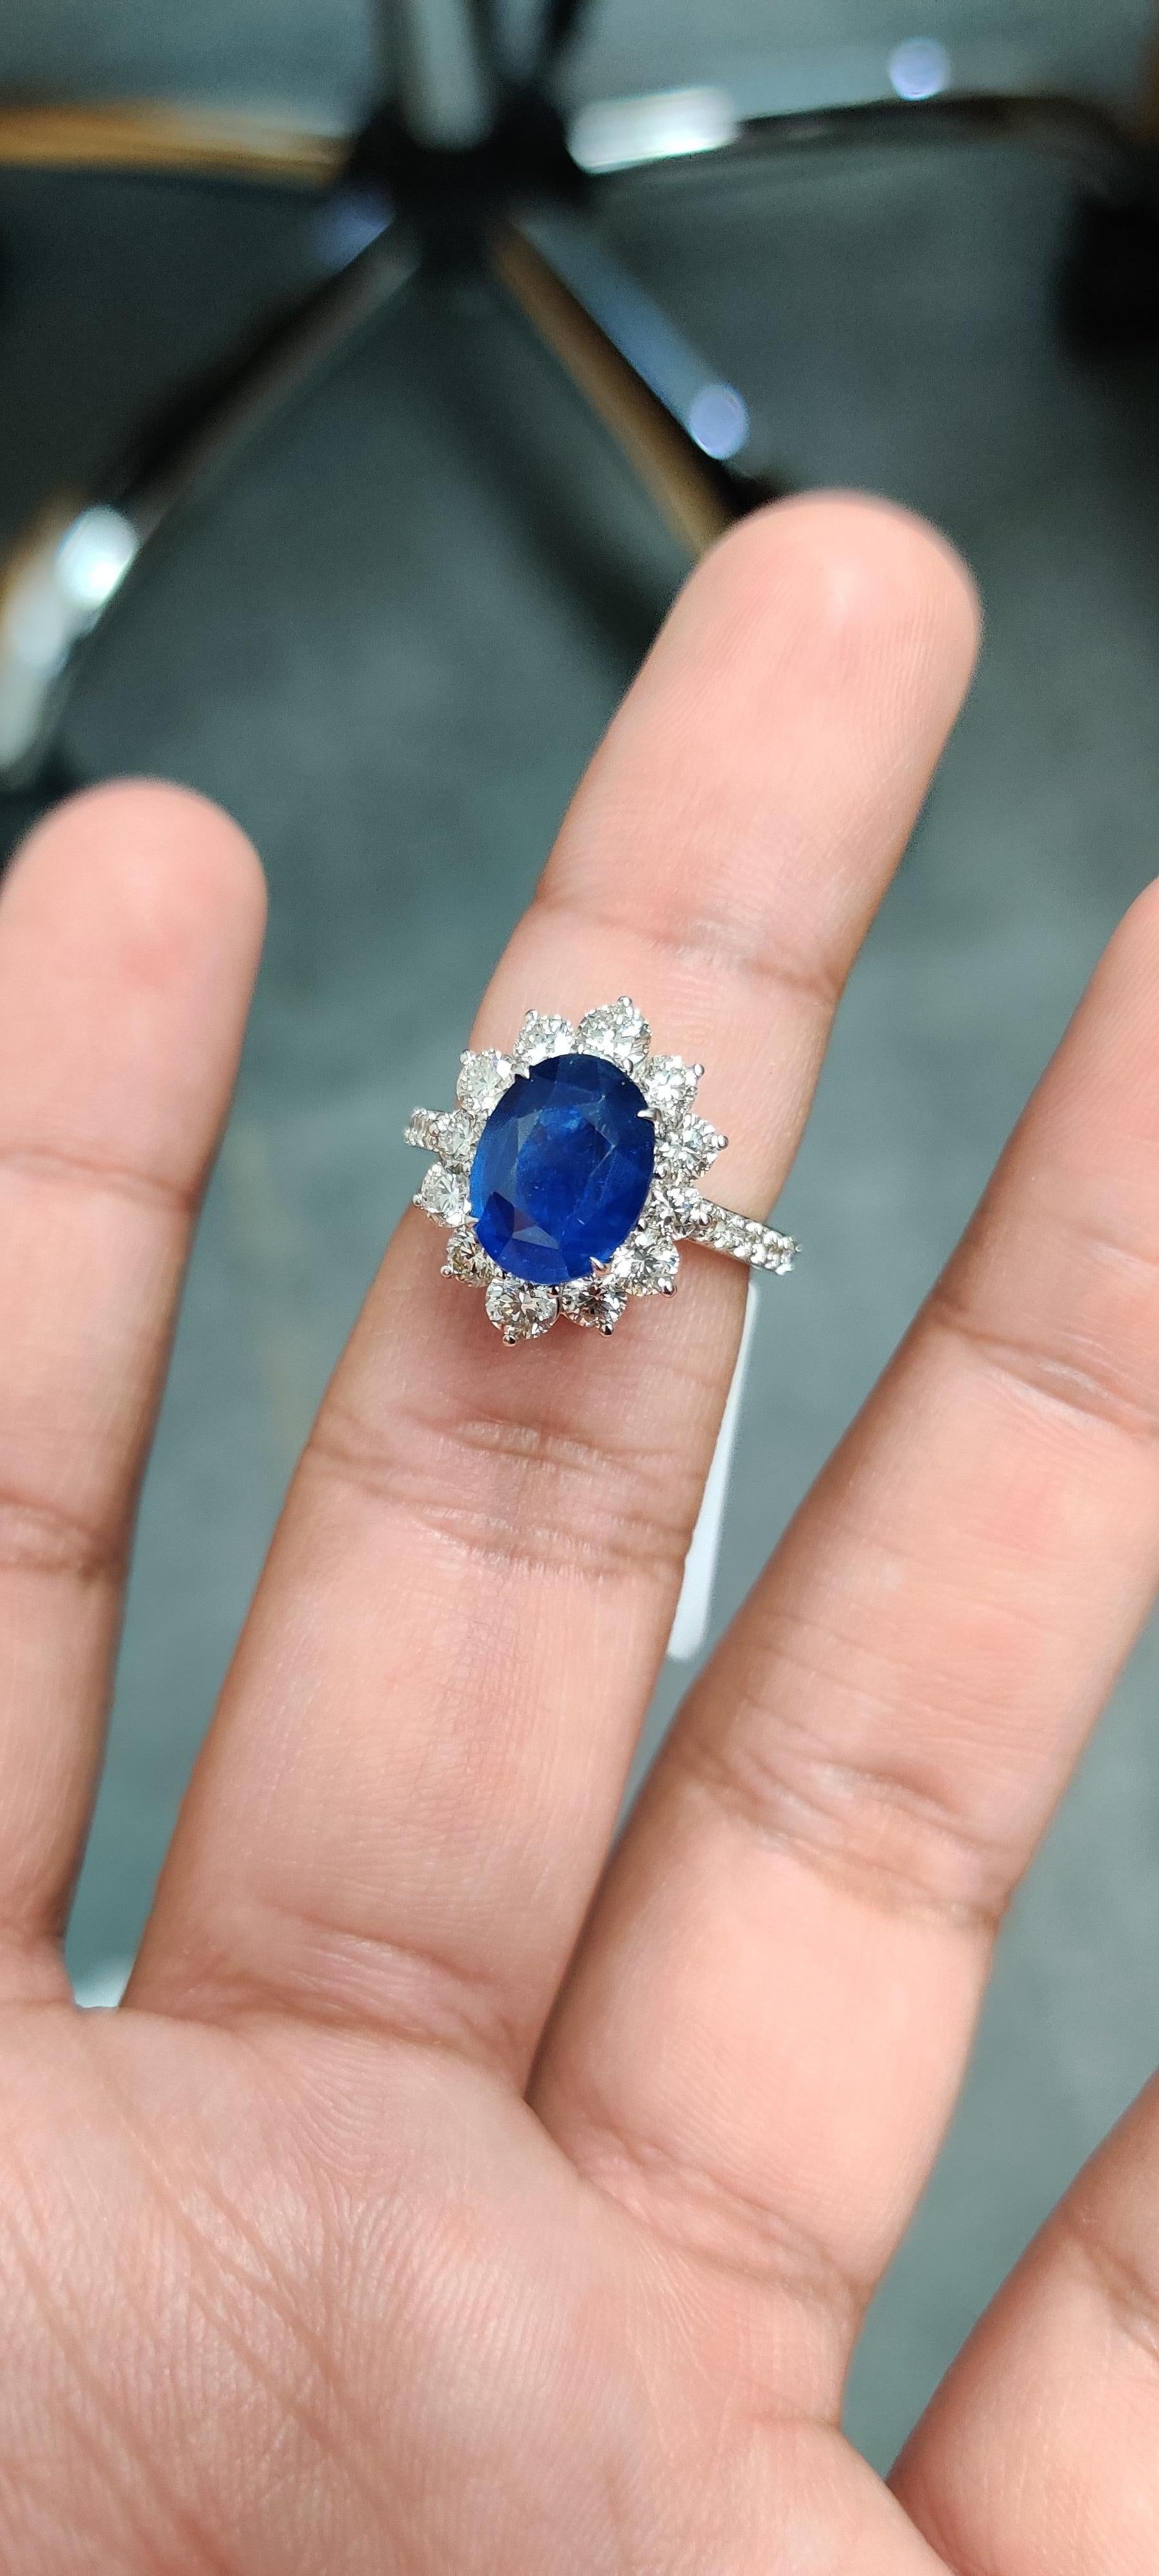 Oval Cut 4.19 Carat Sapphire Diamond Cocktail Ring For Sale